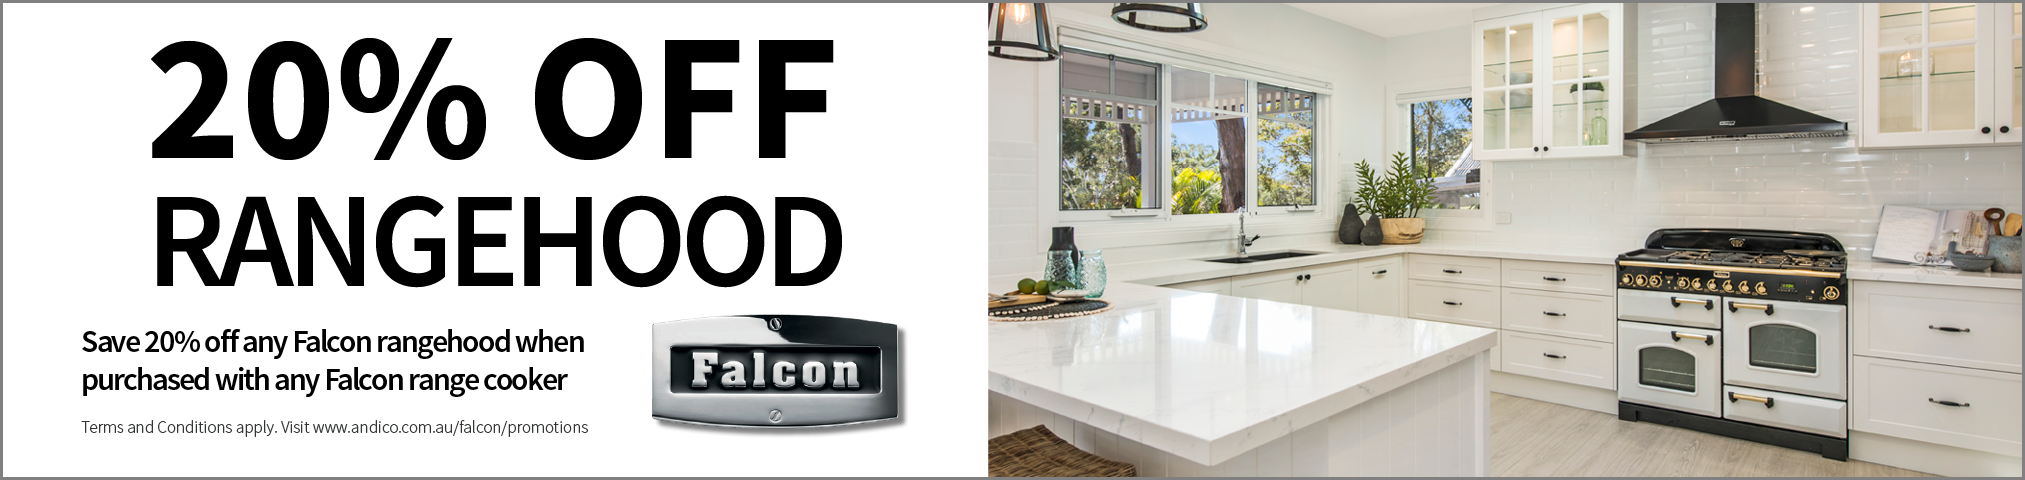 Save 20% off any Falcon rangehood when purchased with any Falcon range cooker